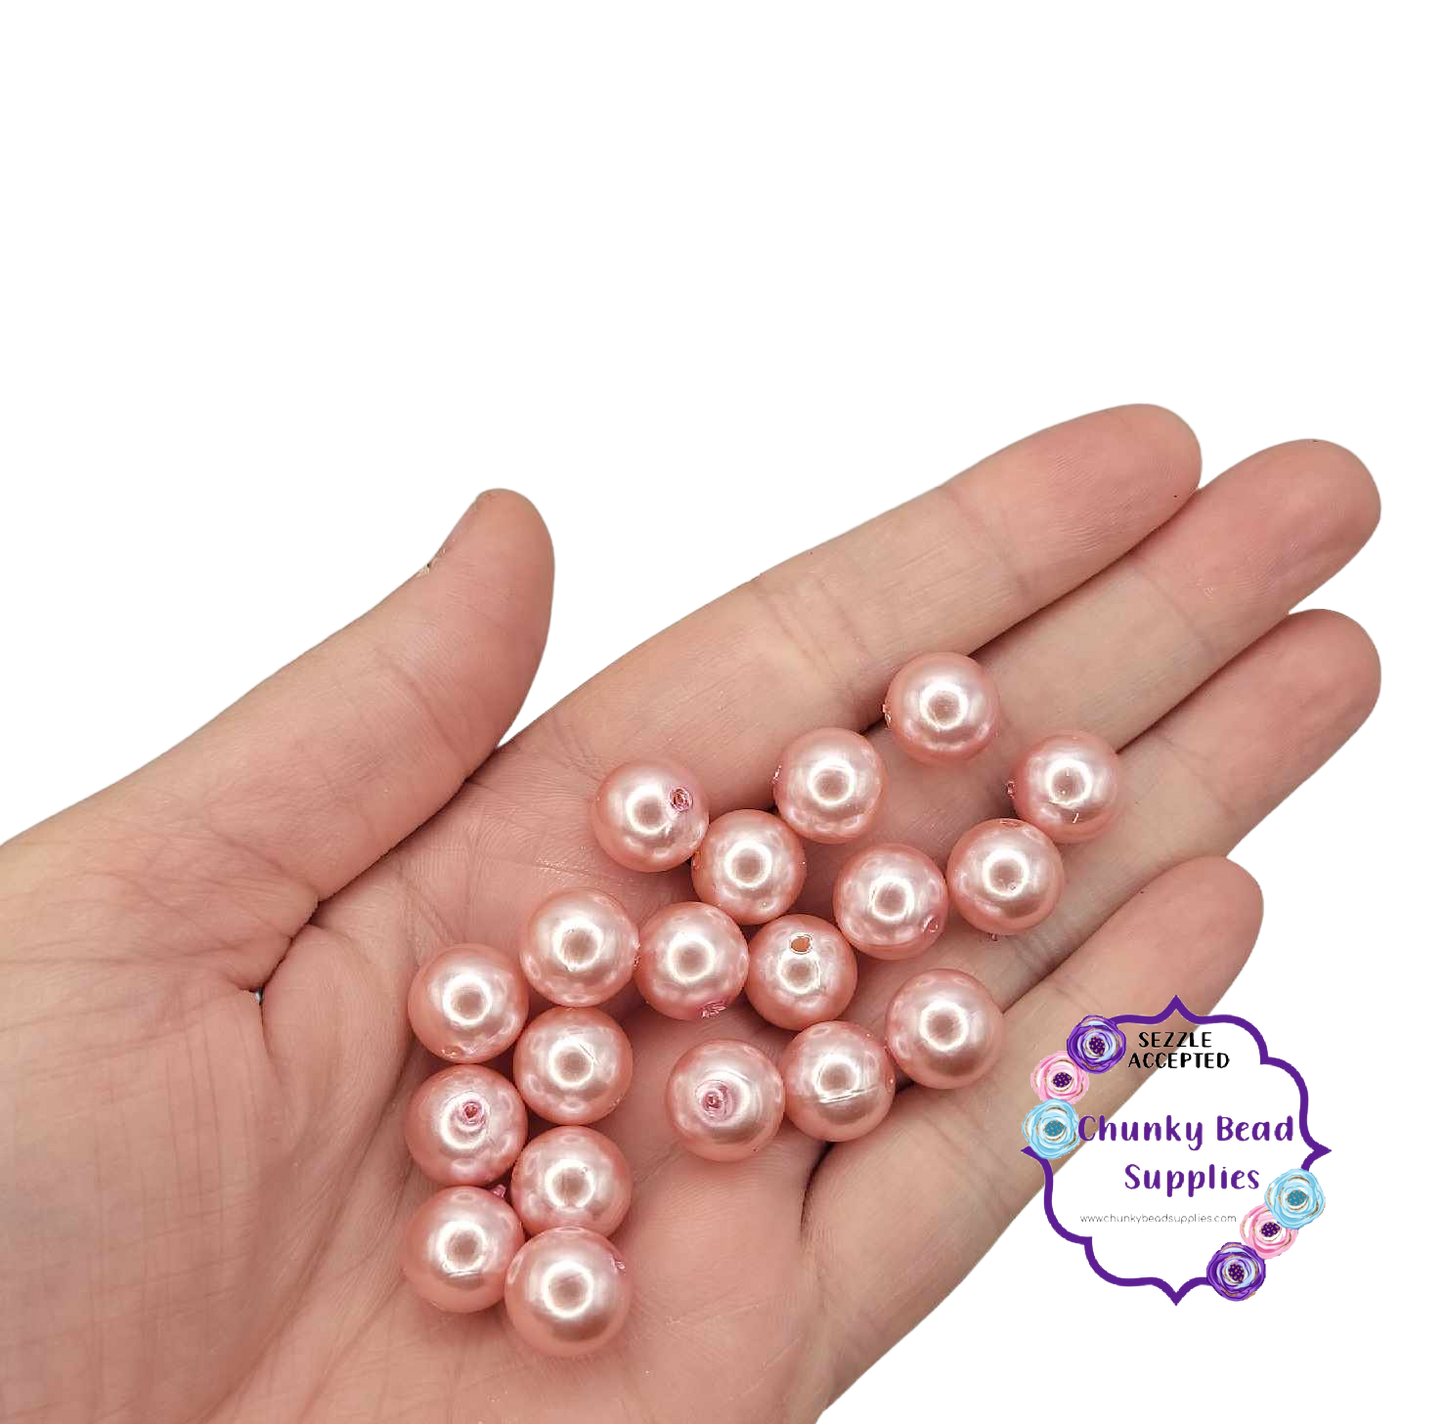 12mm "Ballet Pink" Acrylic Pearls